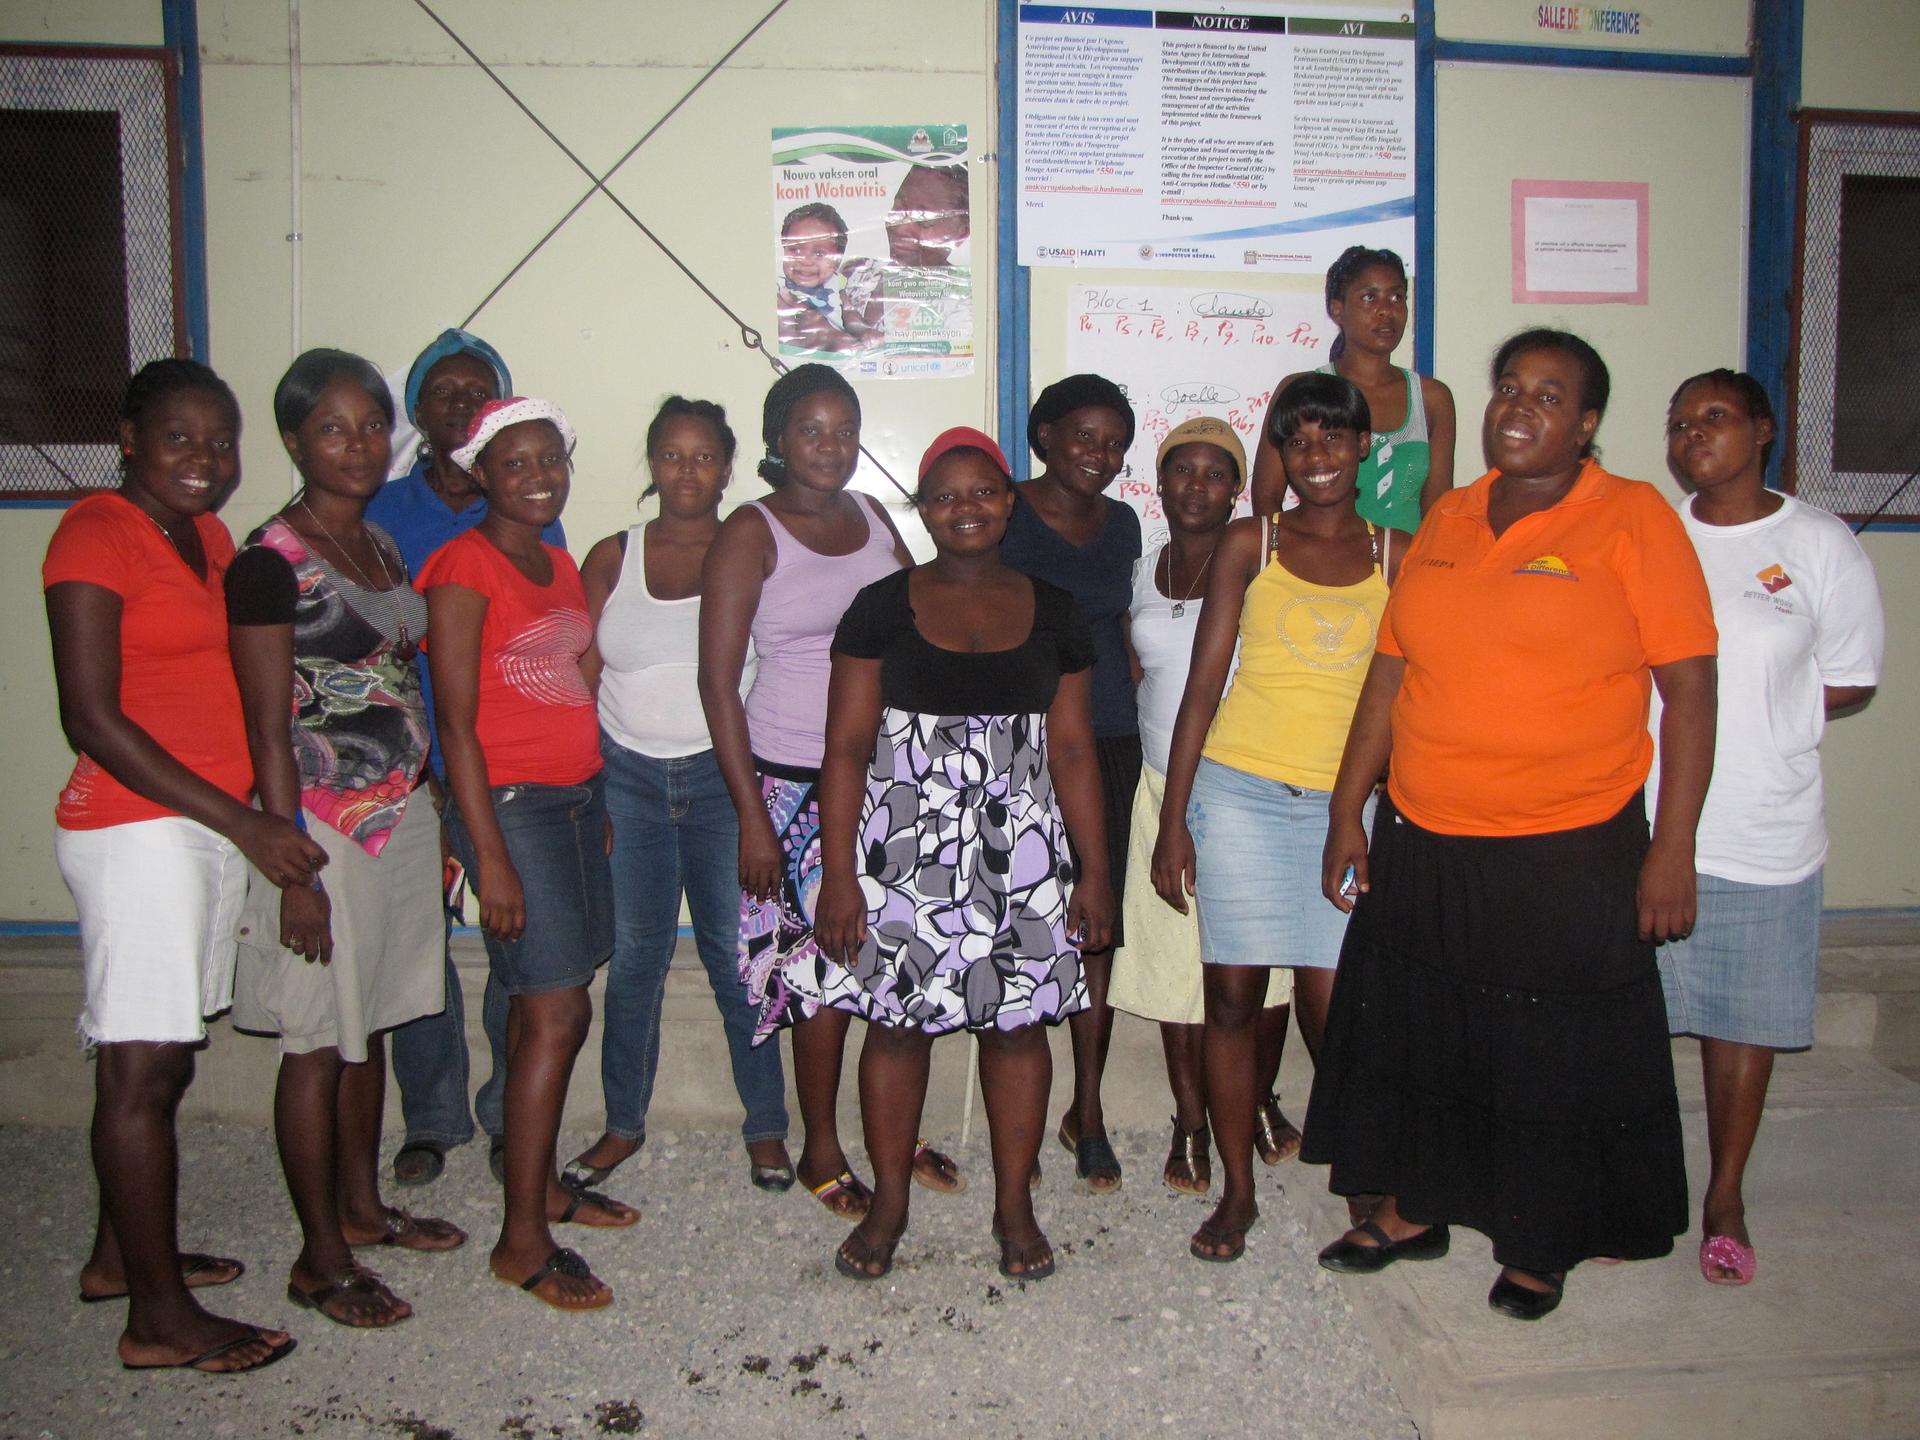 Members of the Association of Women of Potential of Village la Difference after their weekly meeting outside the Global Communities conference room.